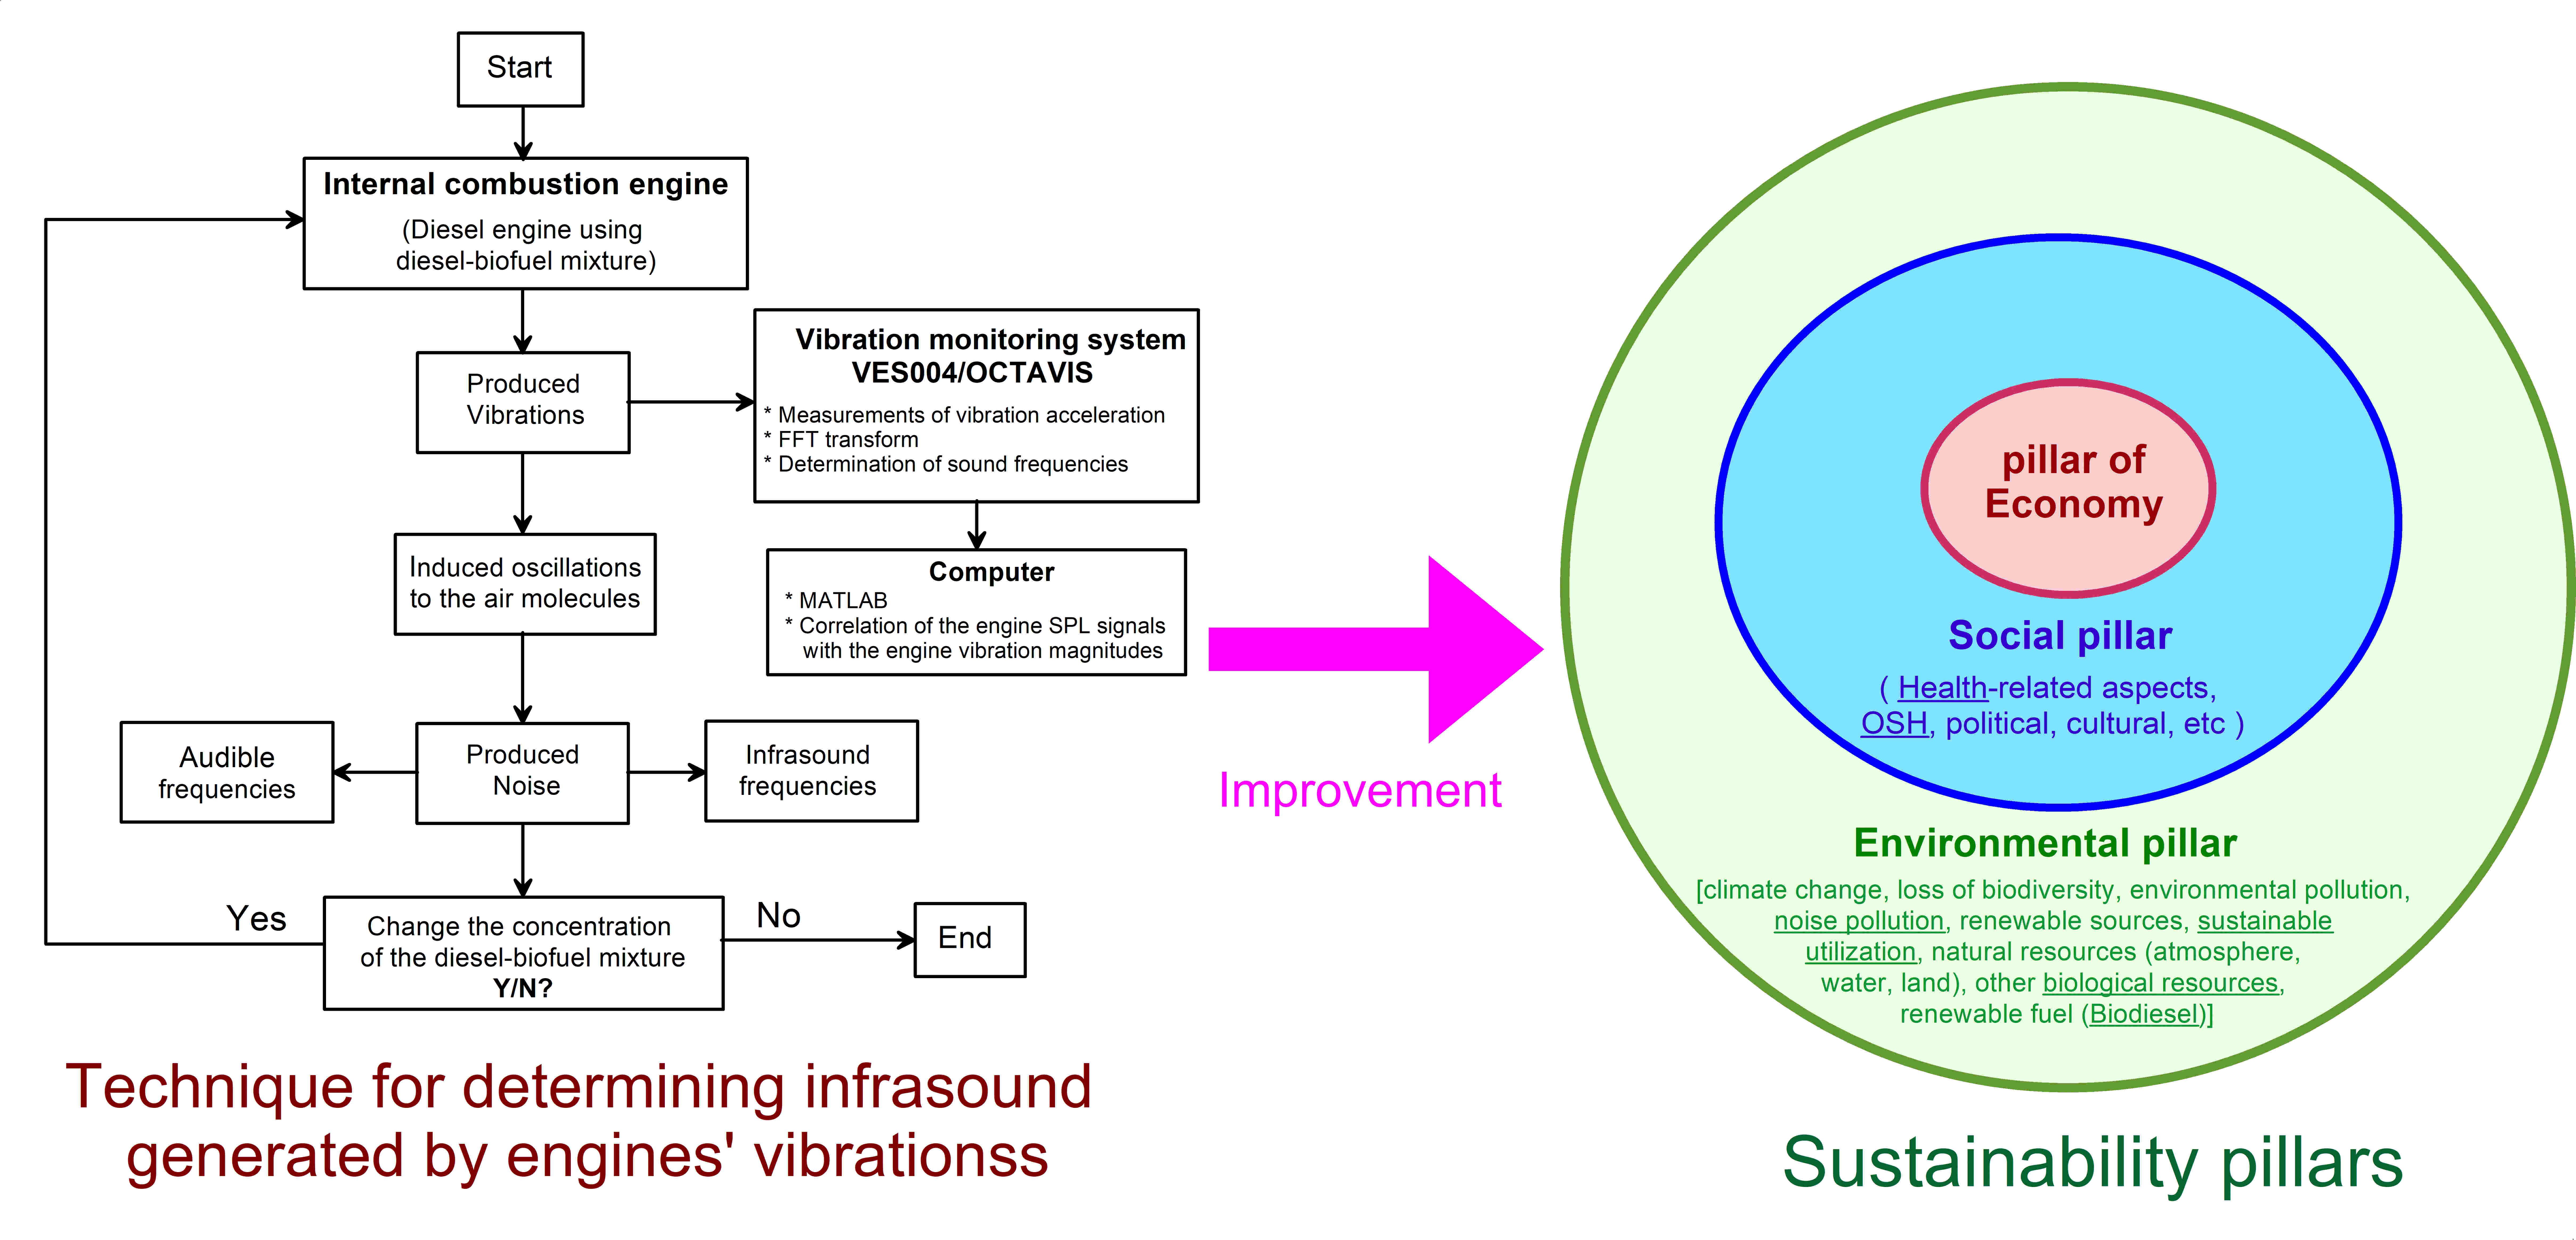 Sustainability | Free Full-Text | Potential Effects on Human Safety and  Health from Infrasound and Audible Frequencies Generated by Vibrations of Diesel  Engines Using Biofuel Blends at the Workplaces of Sustainable Engineering